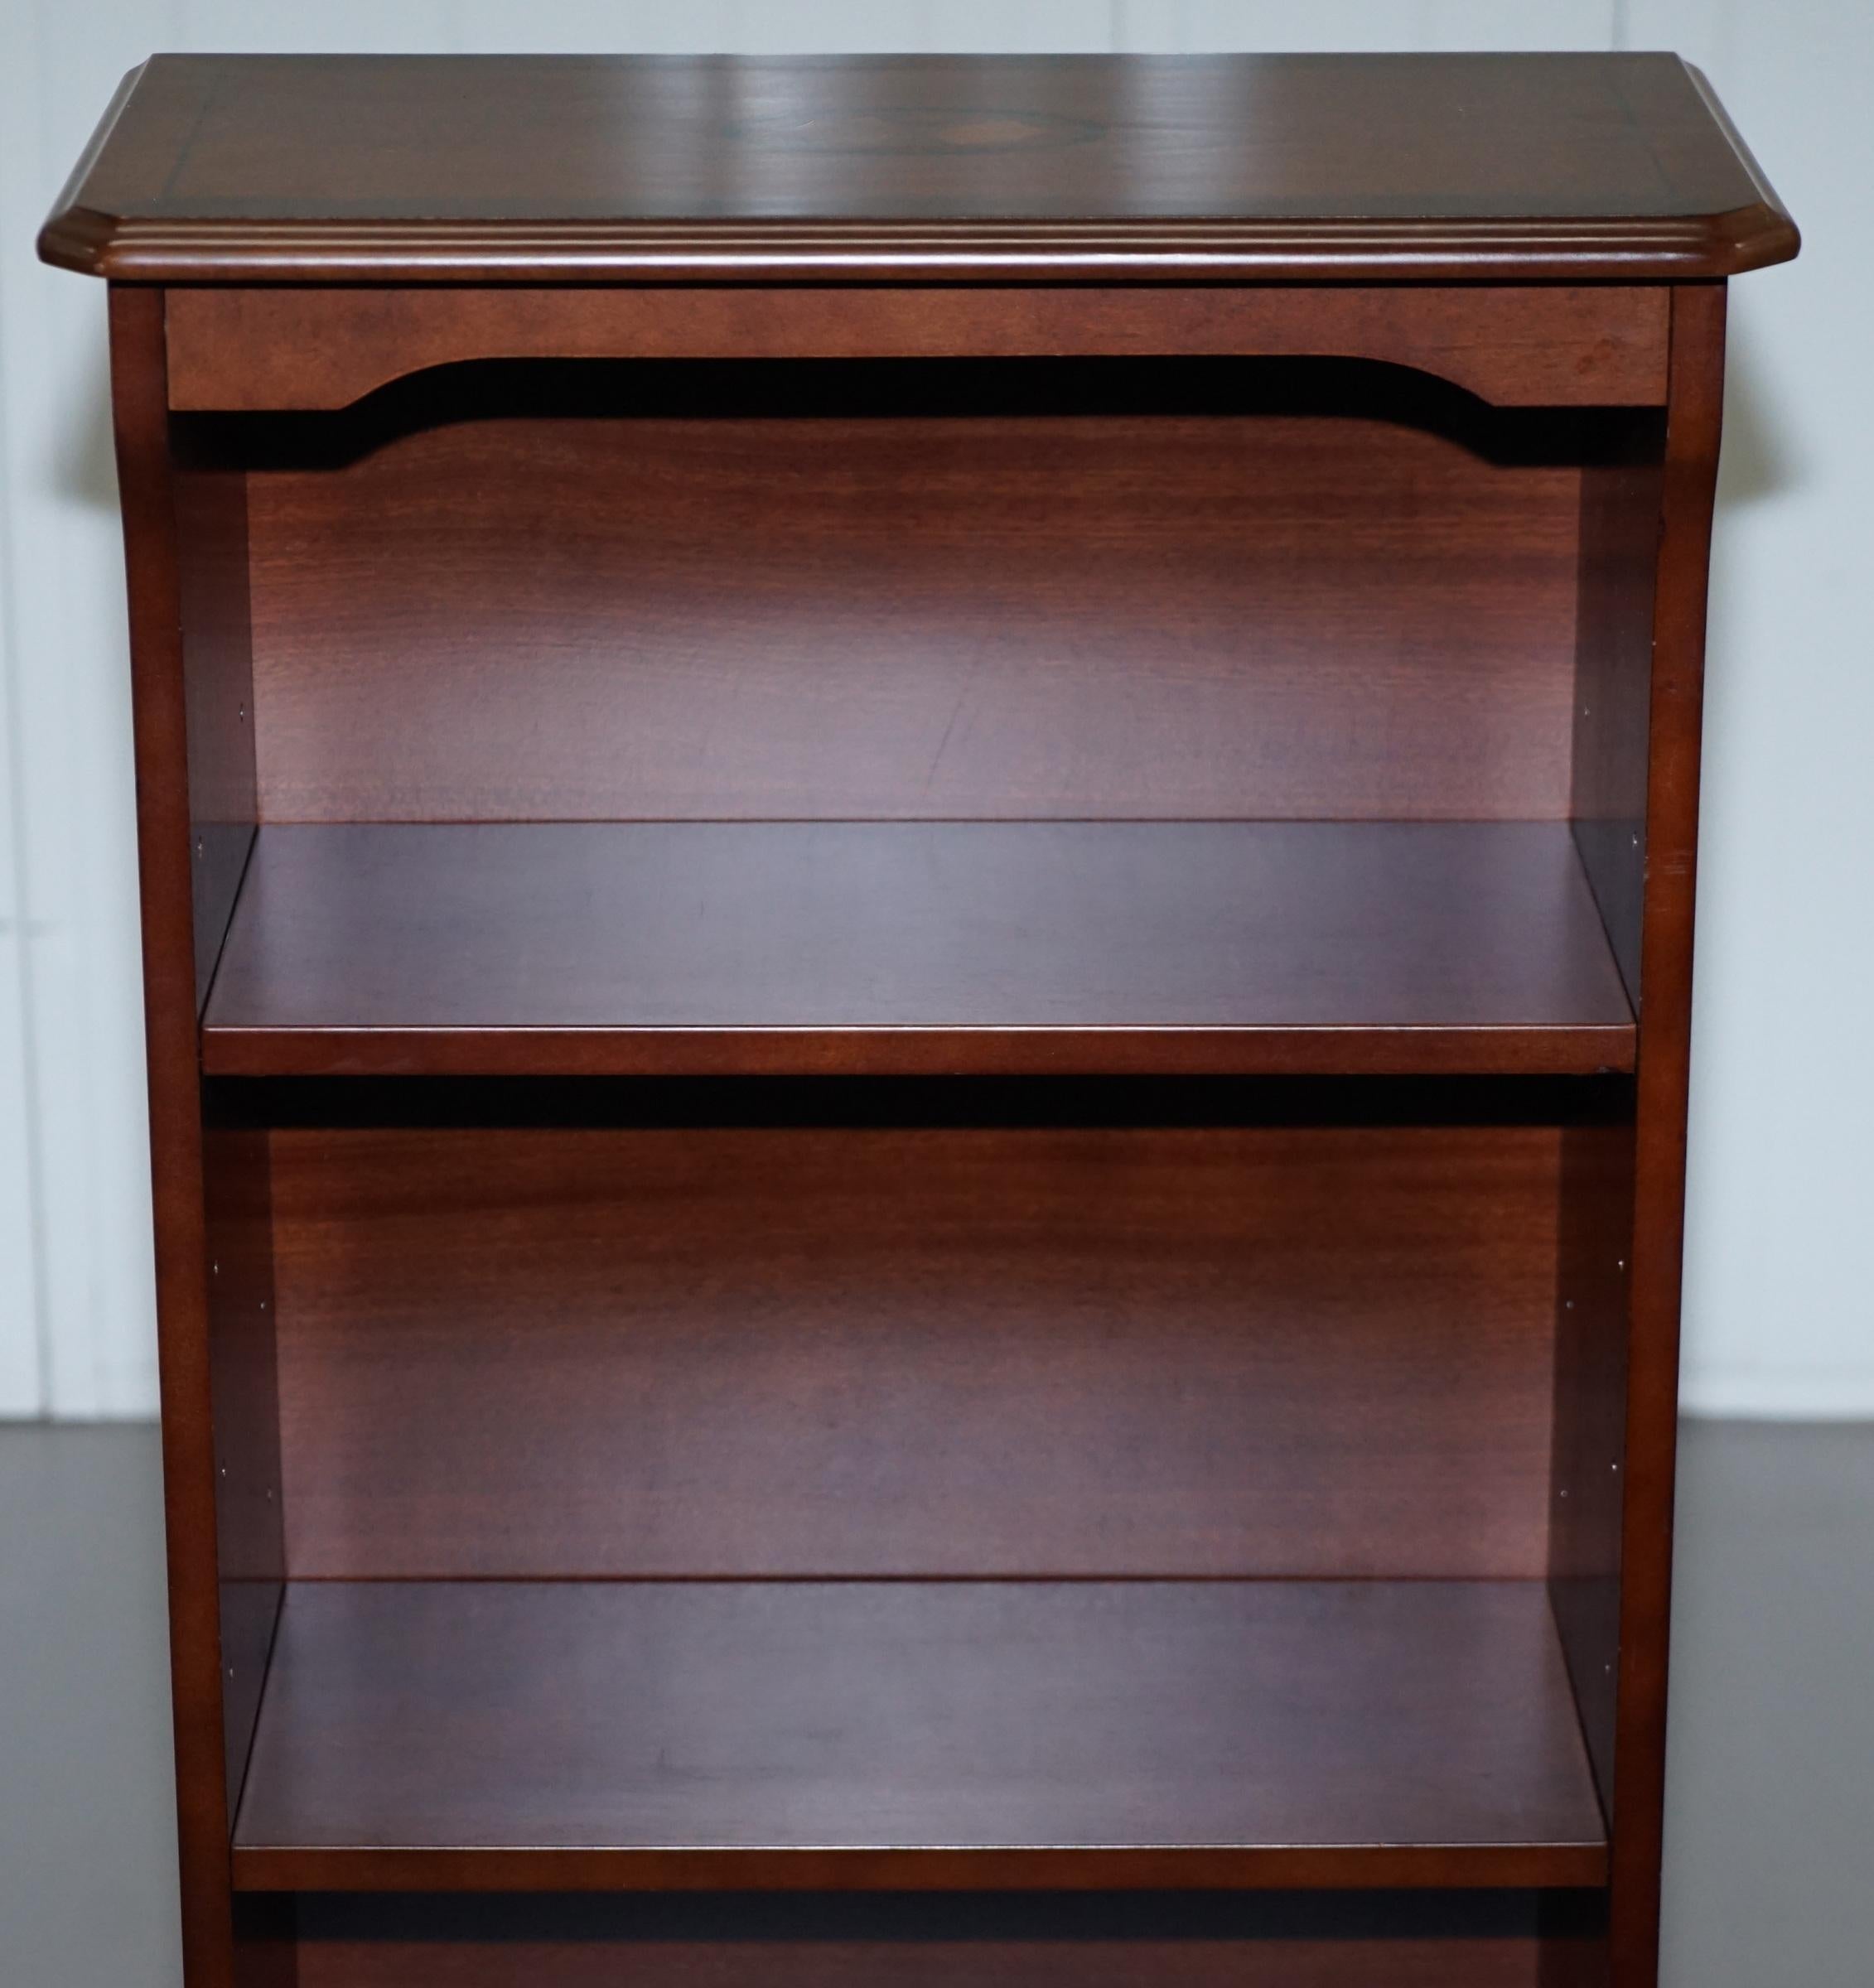 Hand-Crafted Lovely Small Dwarf Open Bookcase in Mahogany Finish with Sheraton Inlaid Top